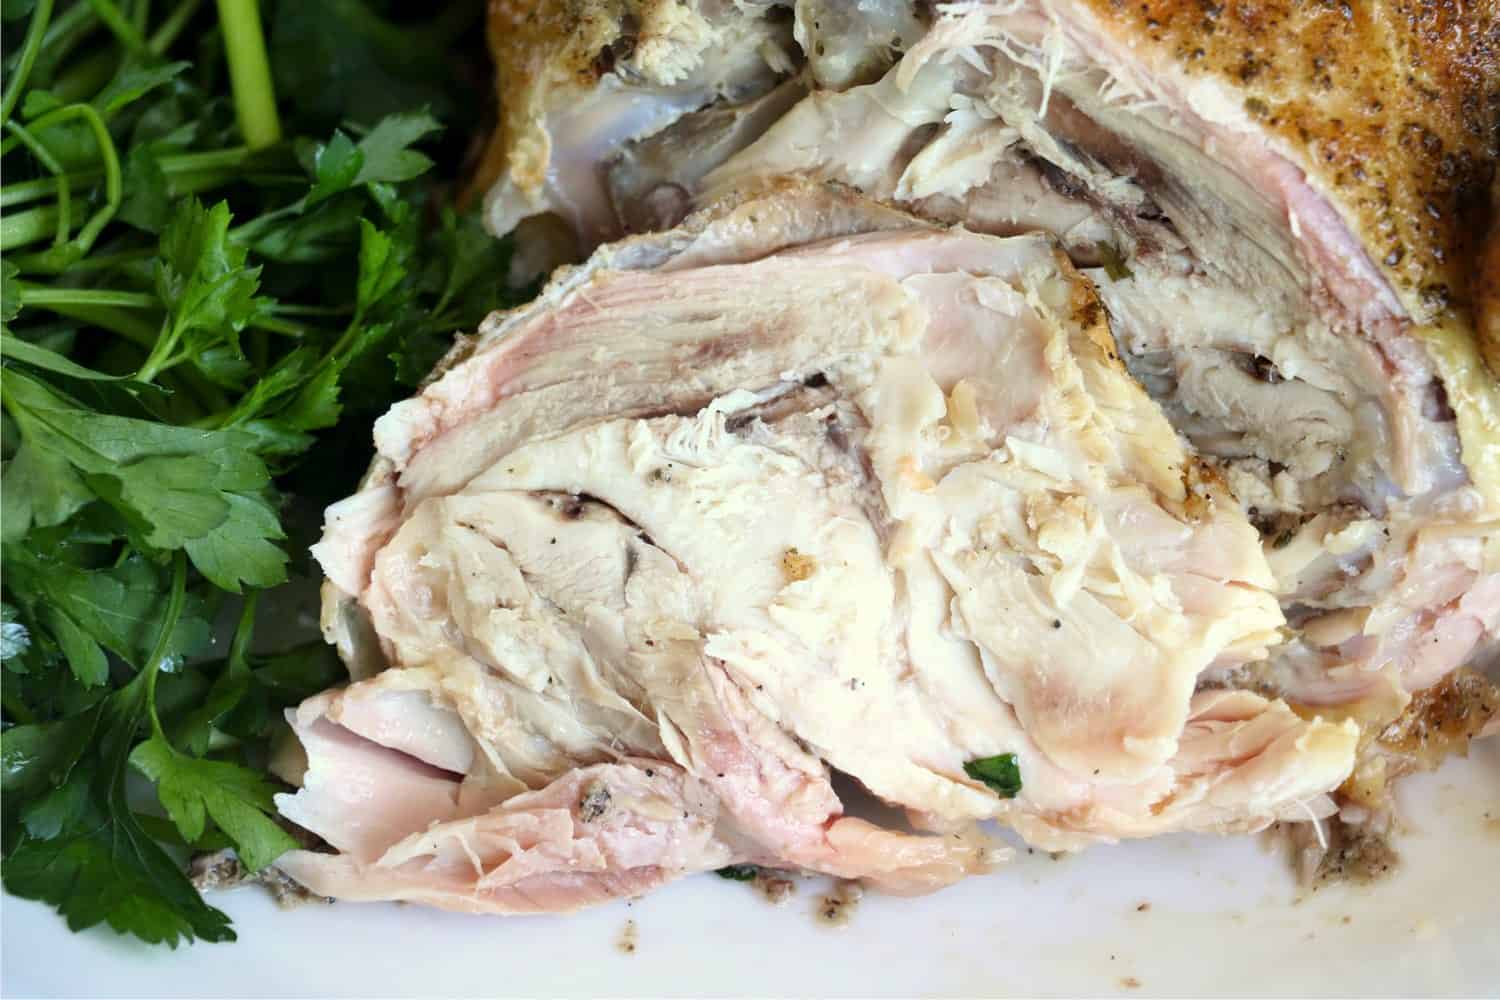 Roasted whole chicken sliced with parsley on the side